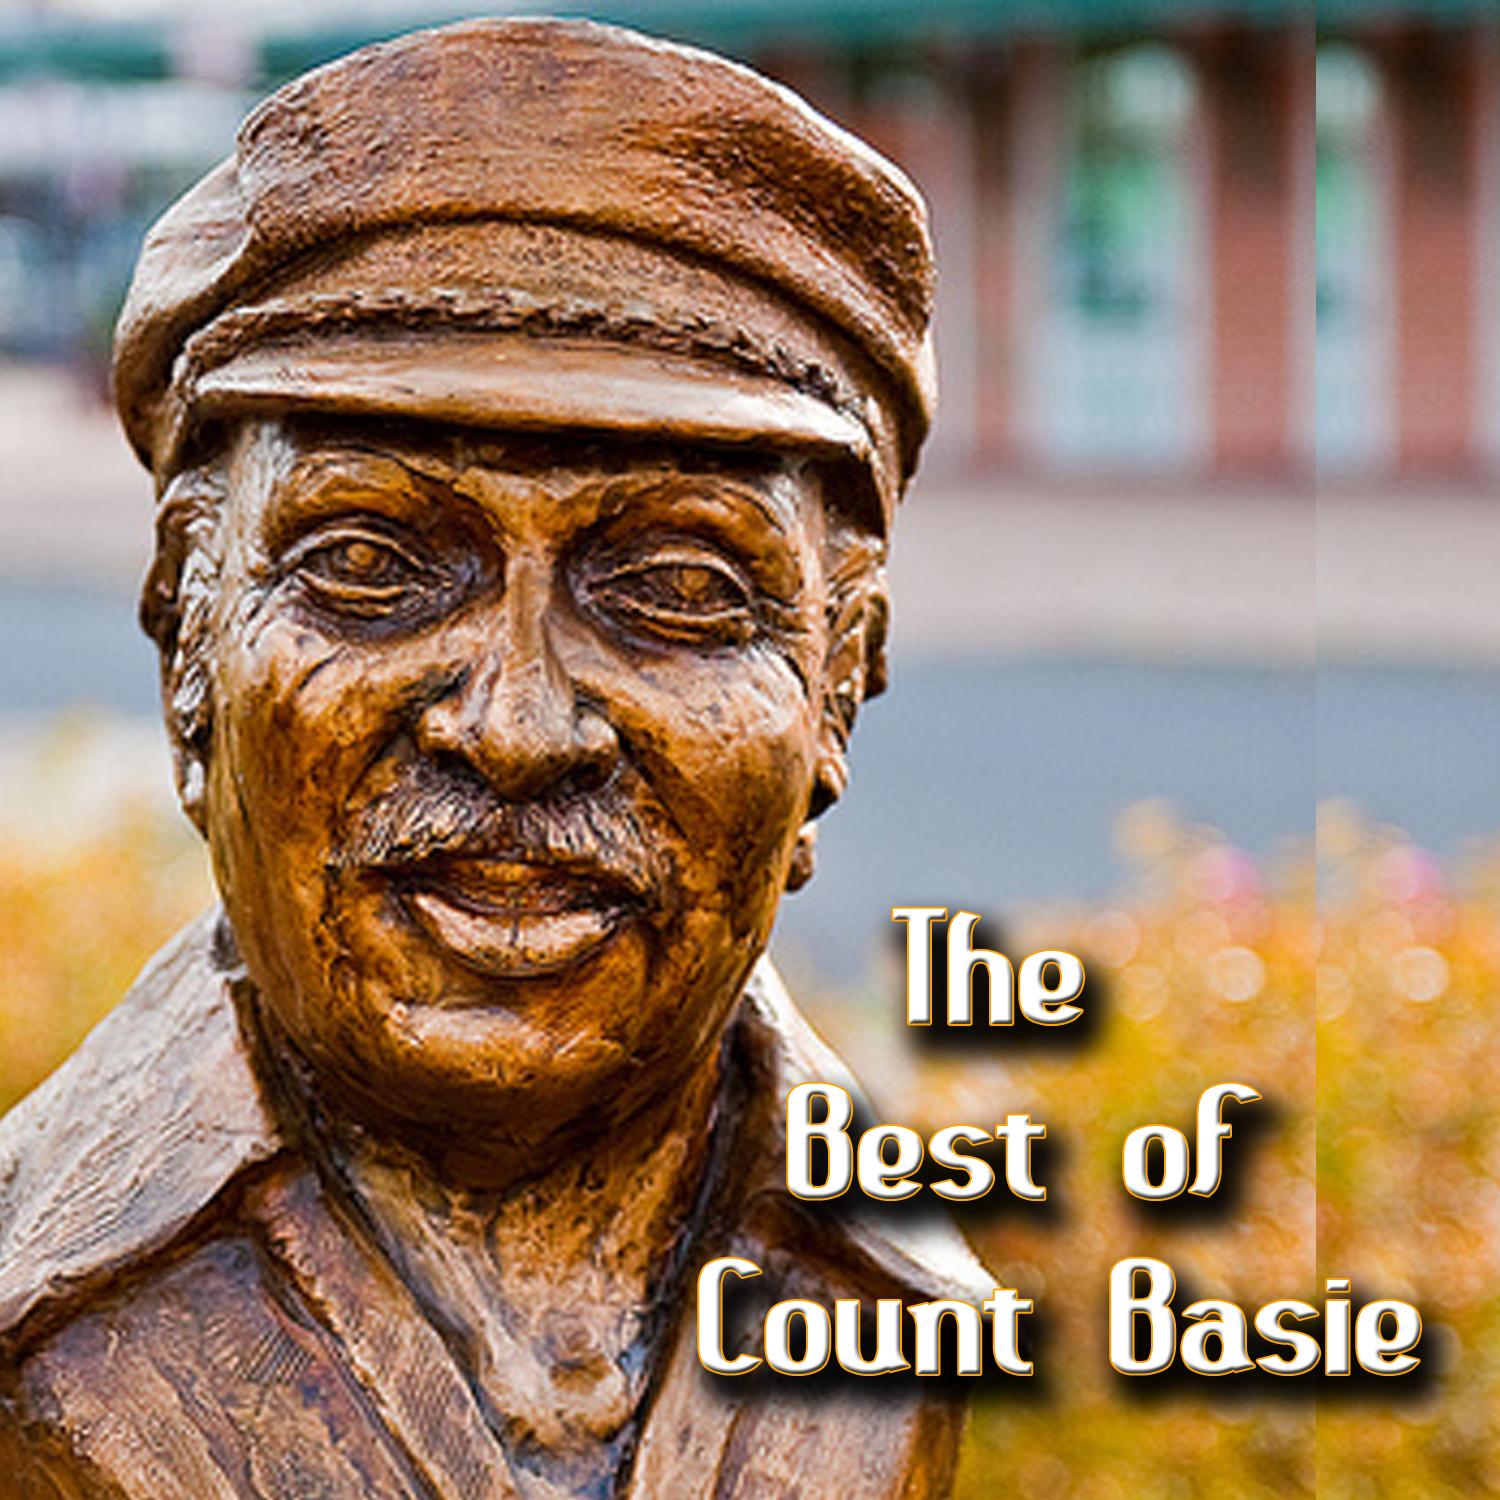 The Best of Count Basie